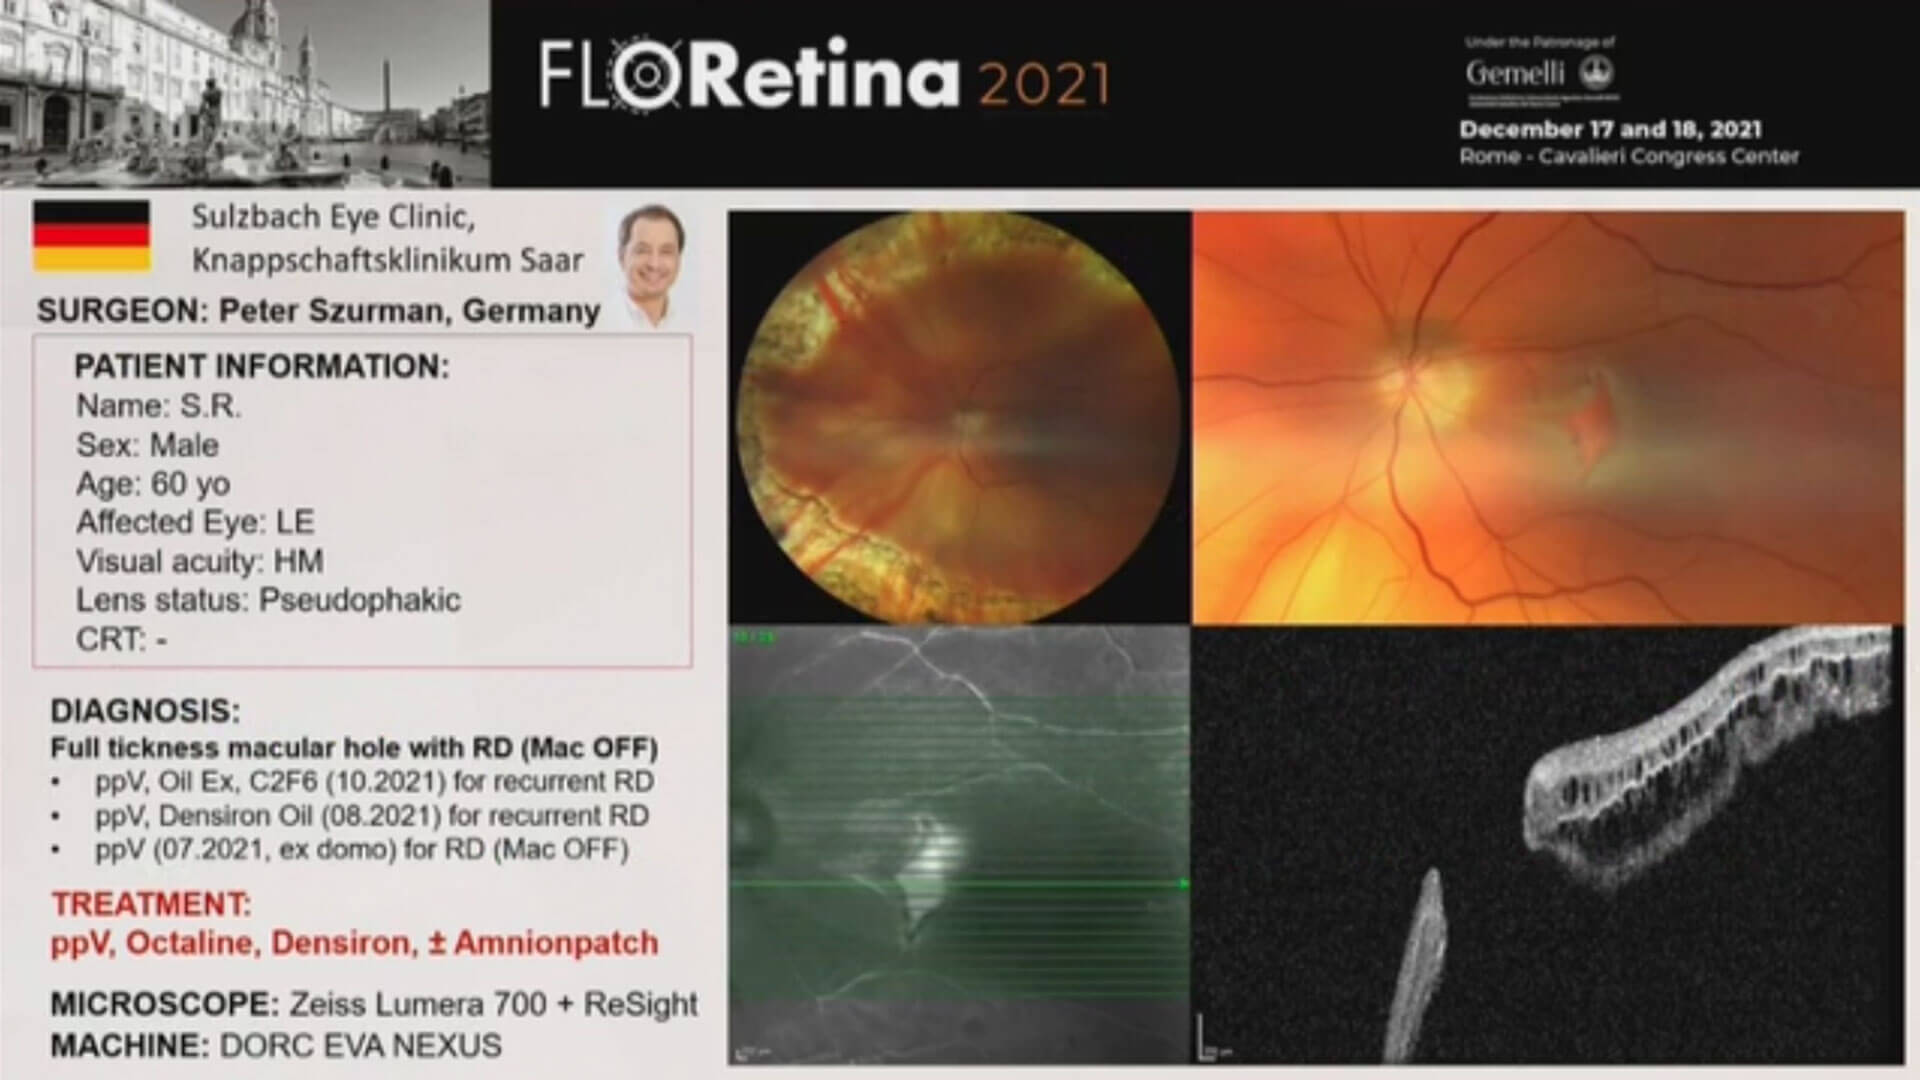 Full tickness macular hole with RD (Mac OFF)